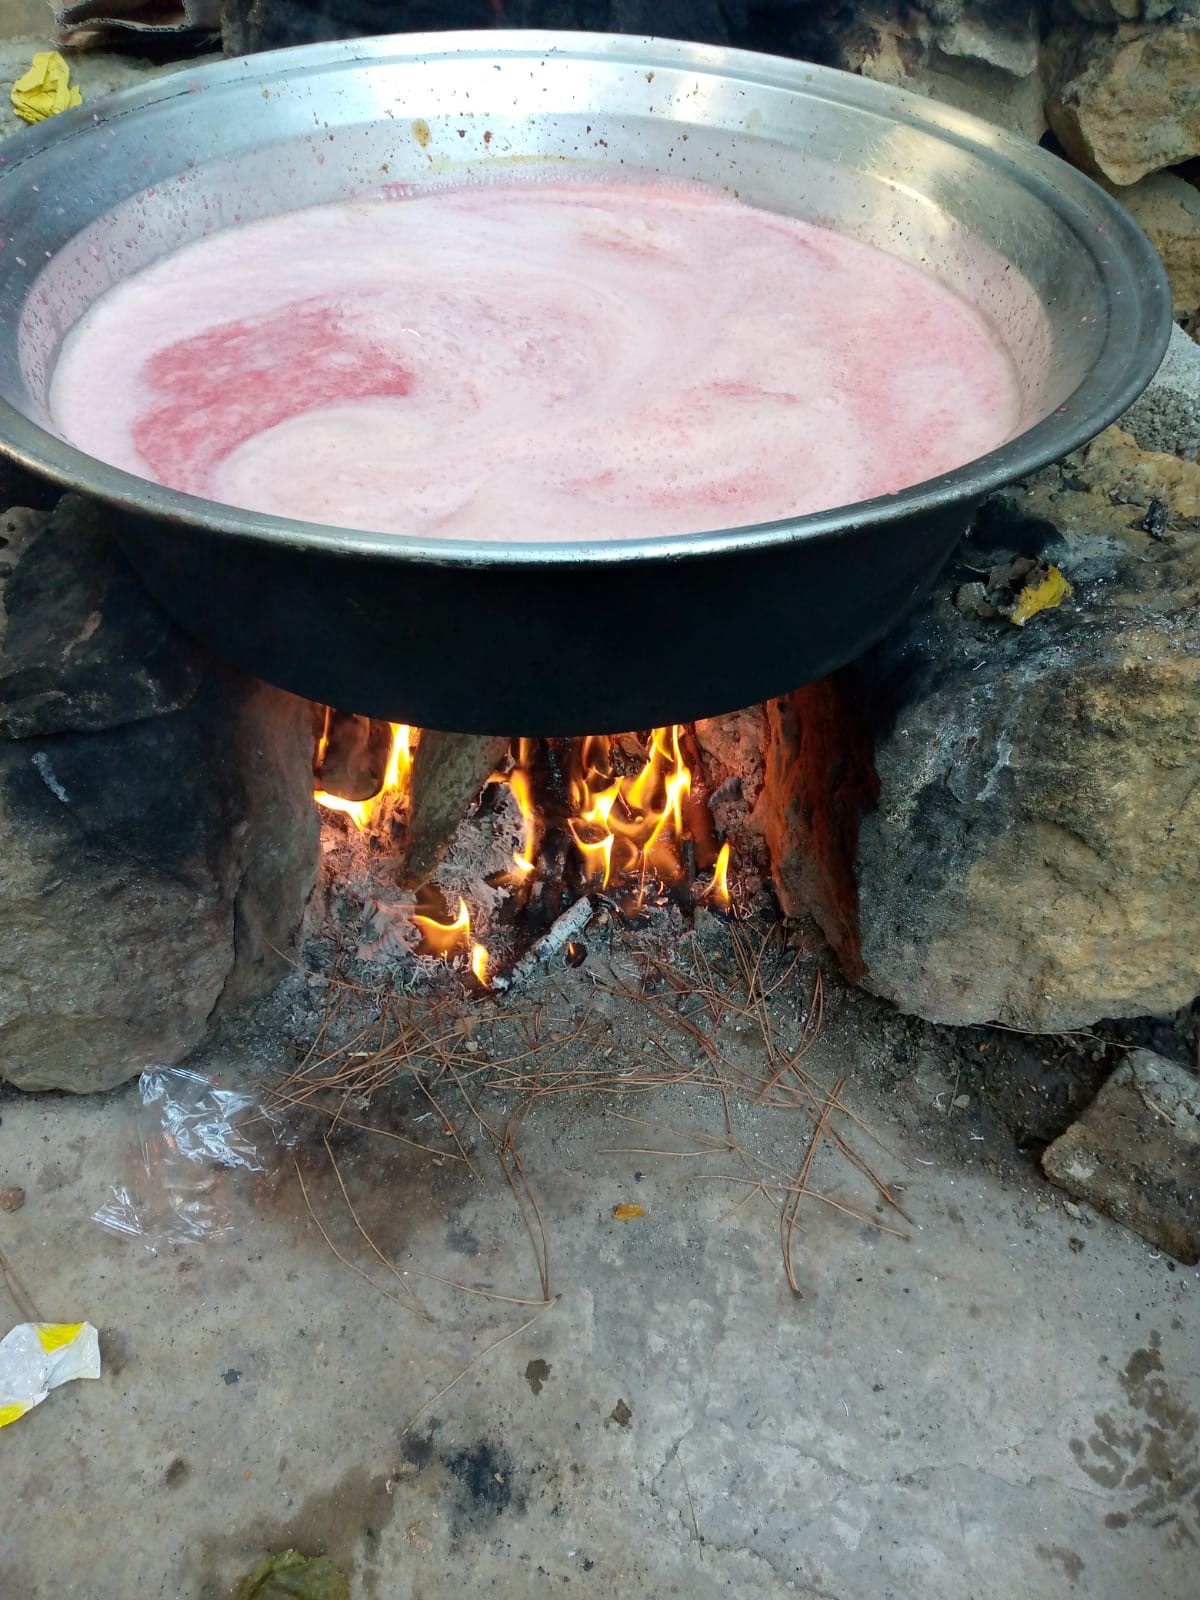 Pomegranate juice is cooked outdoor